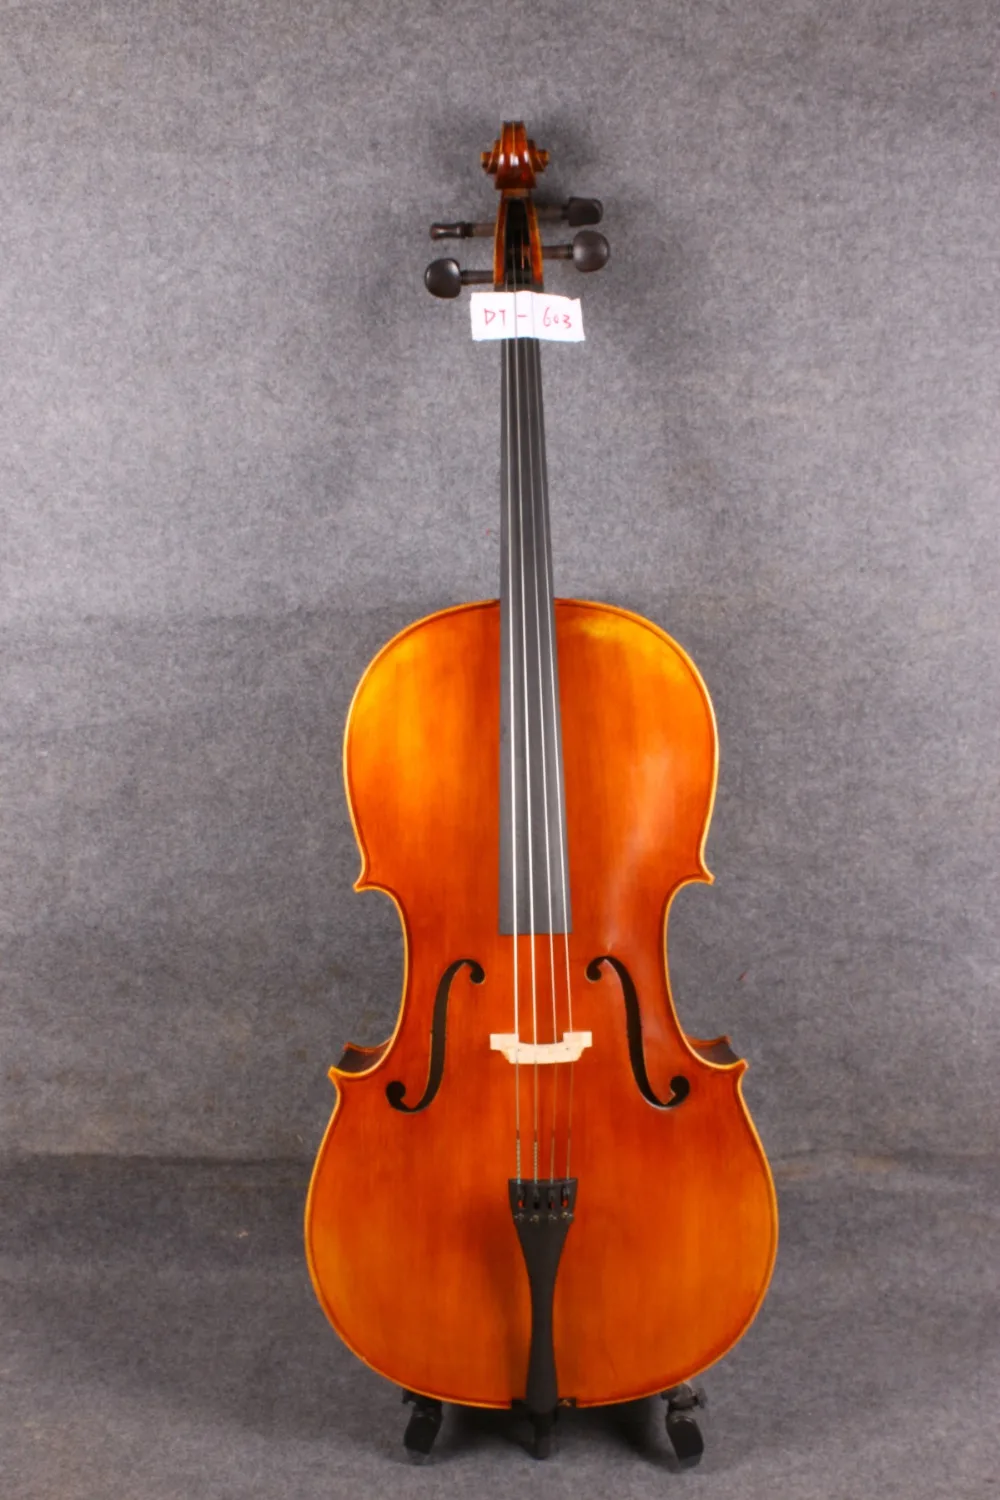 4/4 Cello FLAMD MAPLE Acoustic Model Powerful Sound Hand Carve Maple SPruce Wood Solid wood DT-603